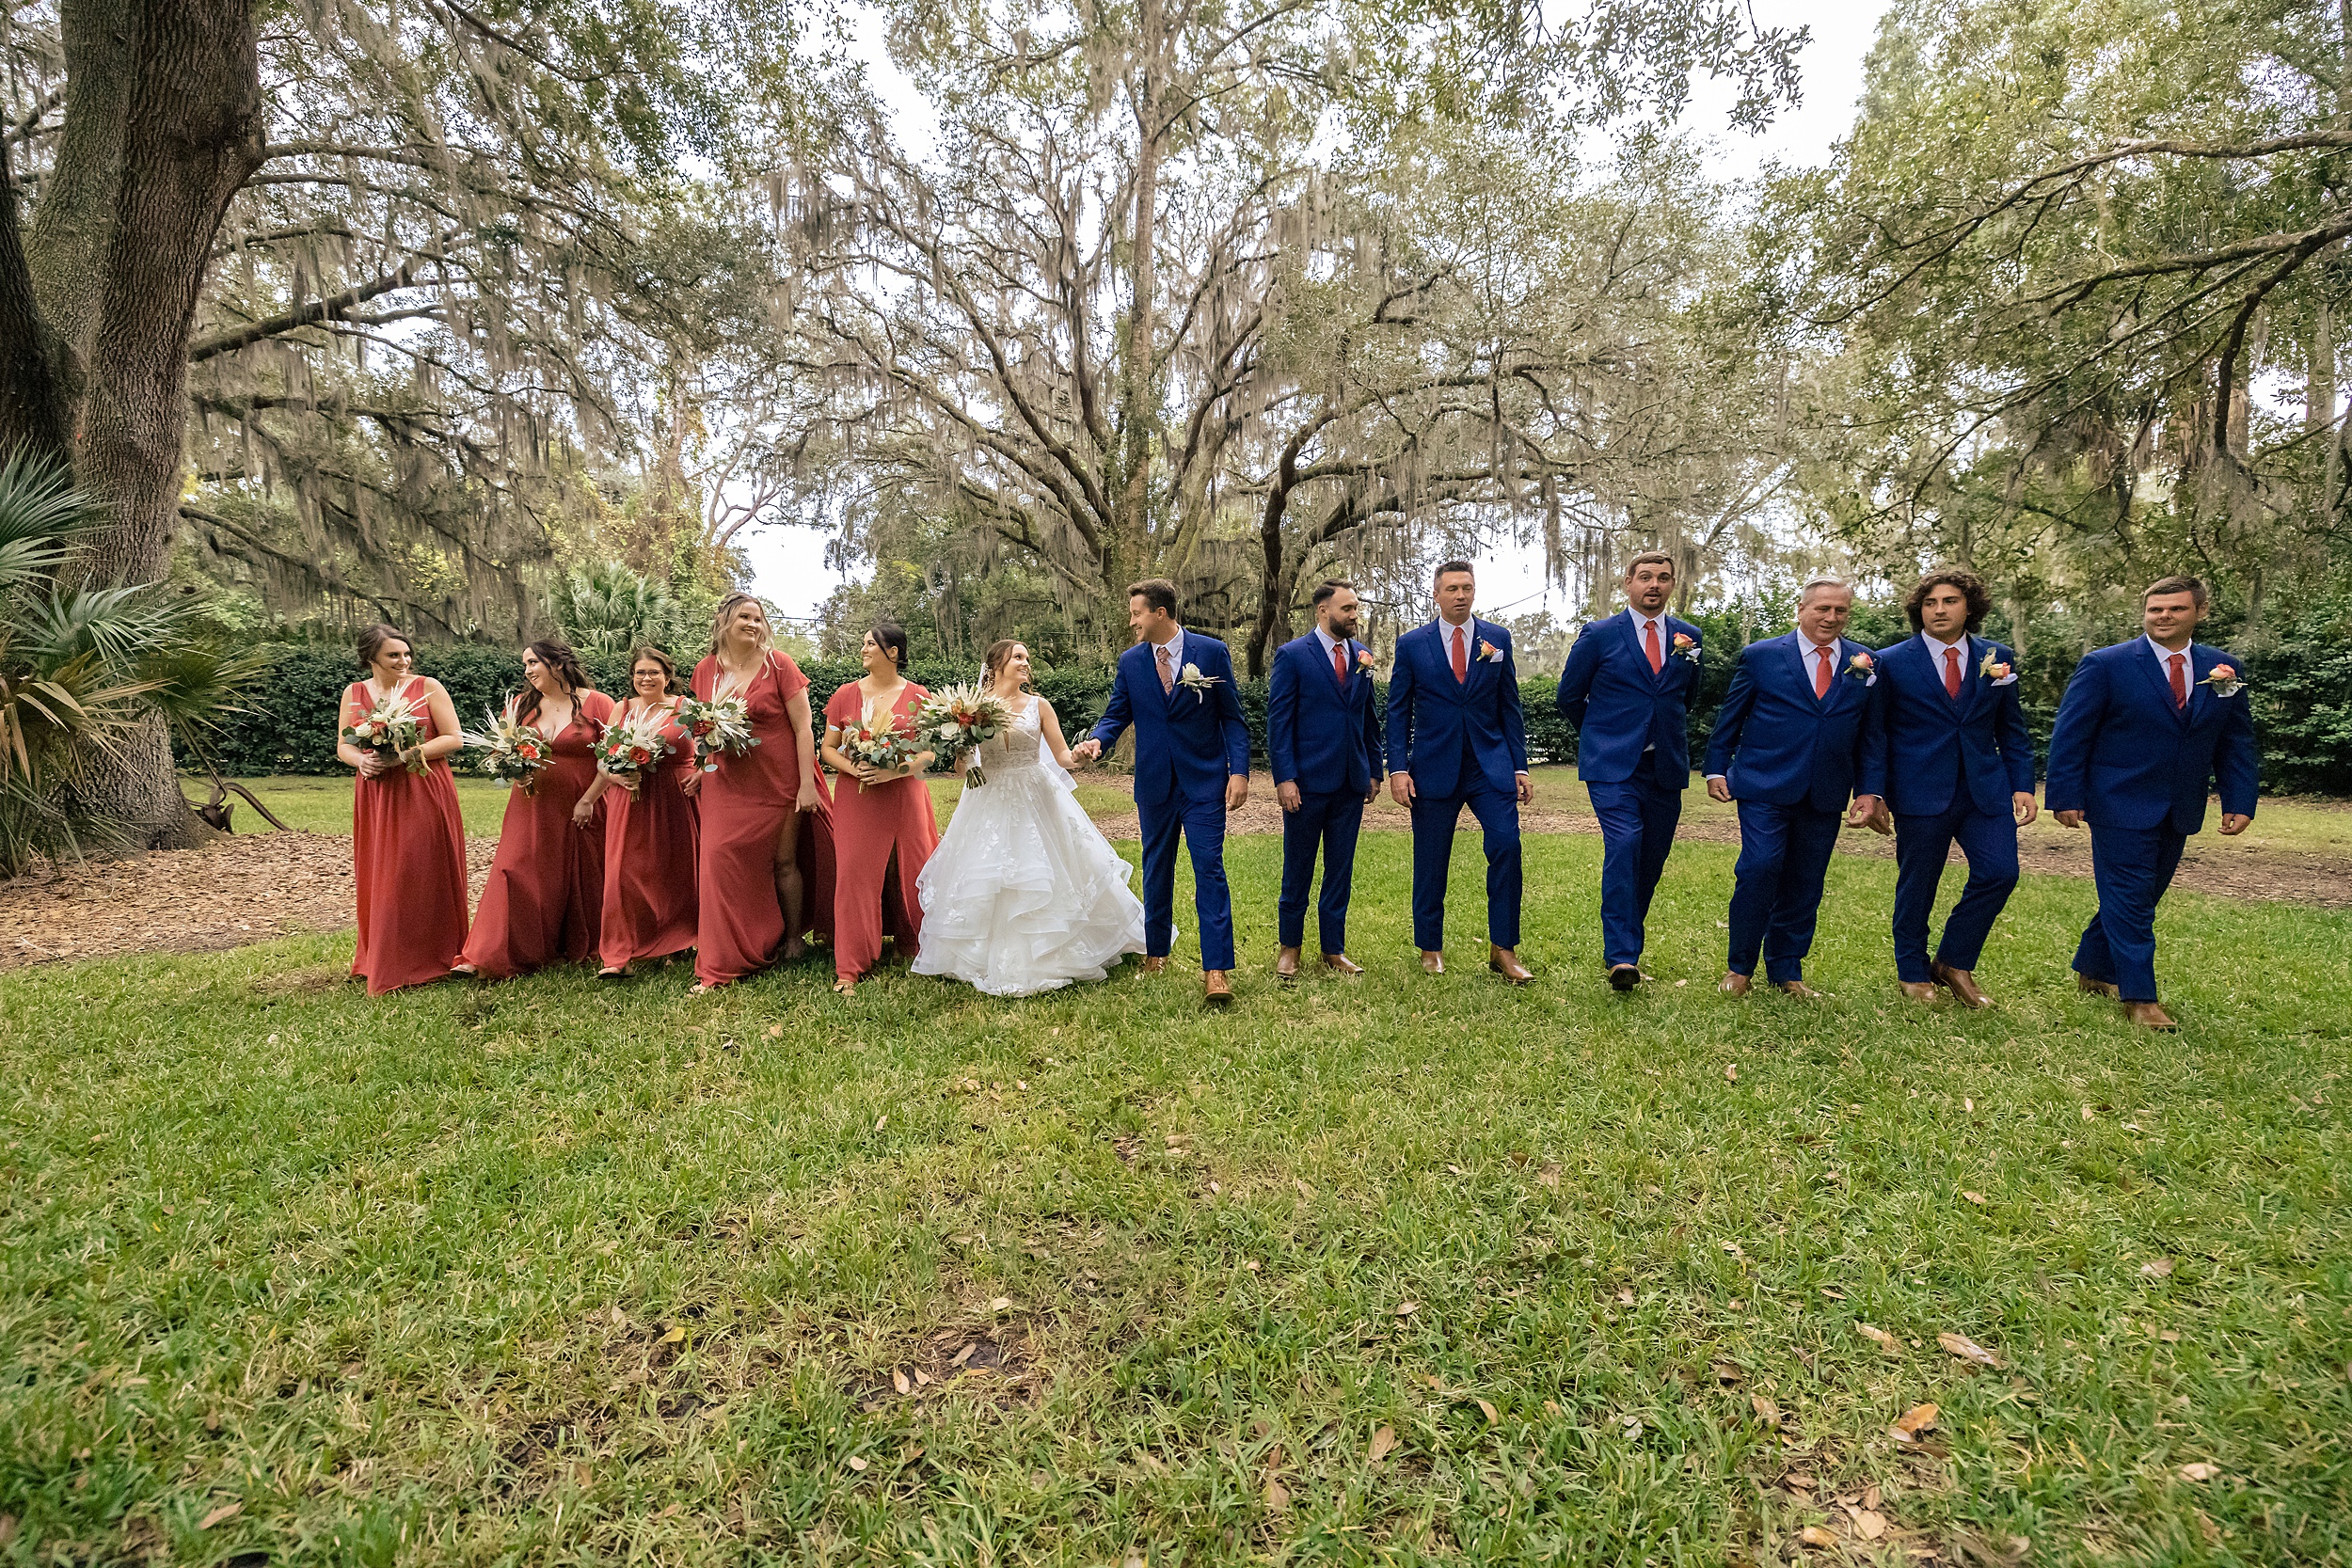 Newlyweds hold hands while walking through a grassy lawn under trees with their large wedding party at a bowing oaks wedding